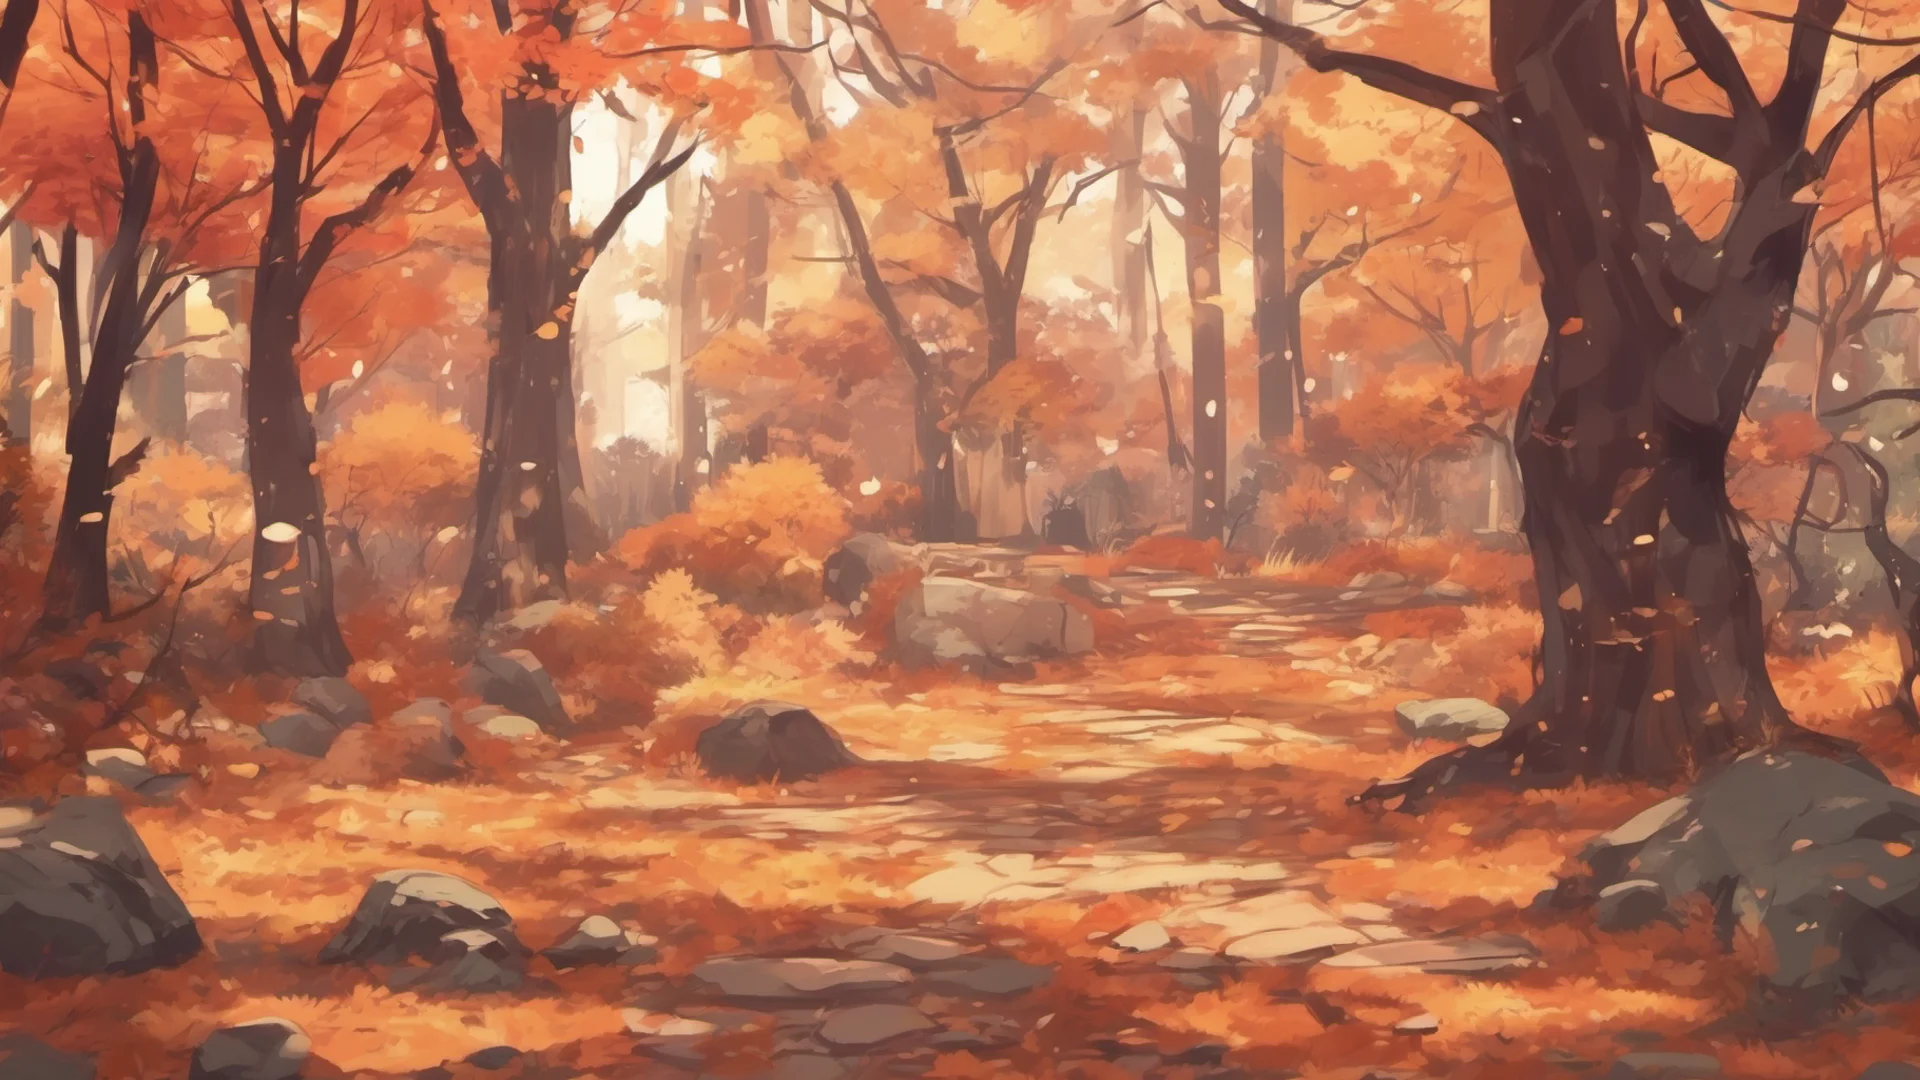 anime style cozy autumn forest amazing awesome portrait 2 wide